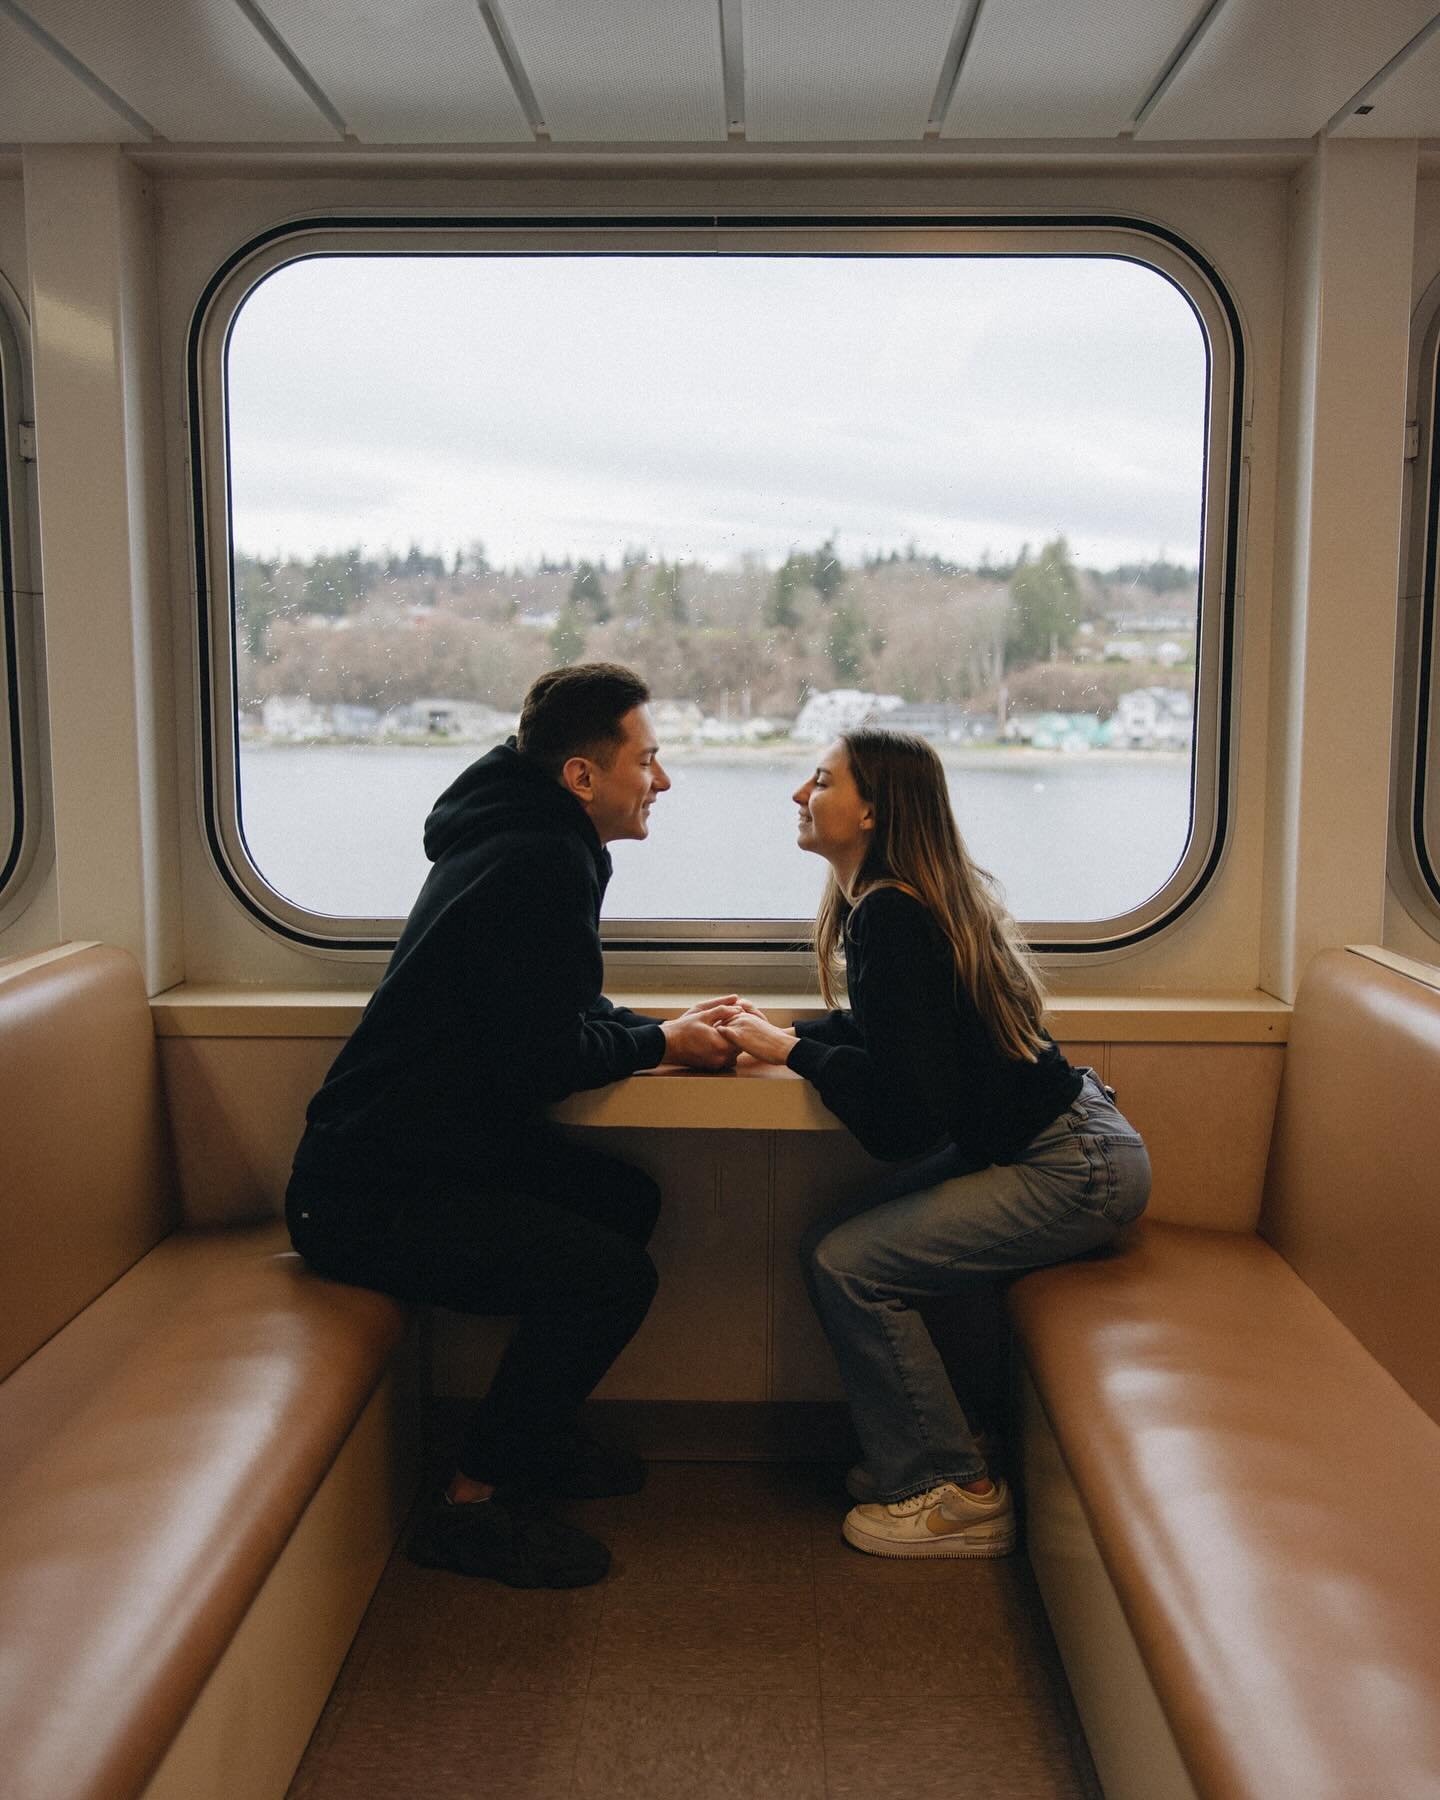 Cloudy in Southern Oregon but looking forward to 80 degrees this Friday! 🌧️/☀️ &mdash; Moments from Daniel &amp; Kate&rsquo;s spontaneous session on the Ferry to Whdbey Island! 

-
-
-

#gabrielramirezphotography #honestmoments #ferryride #washingto